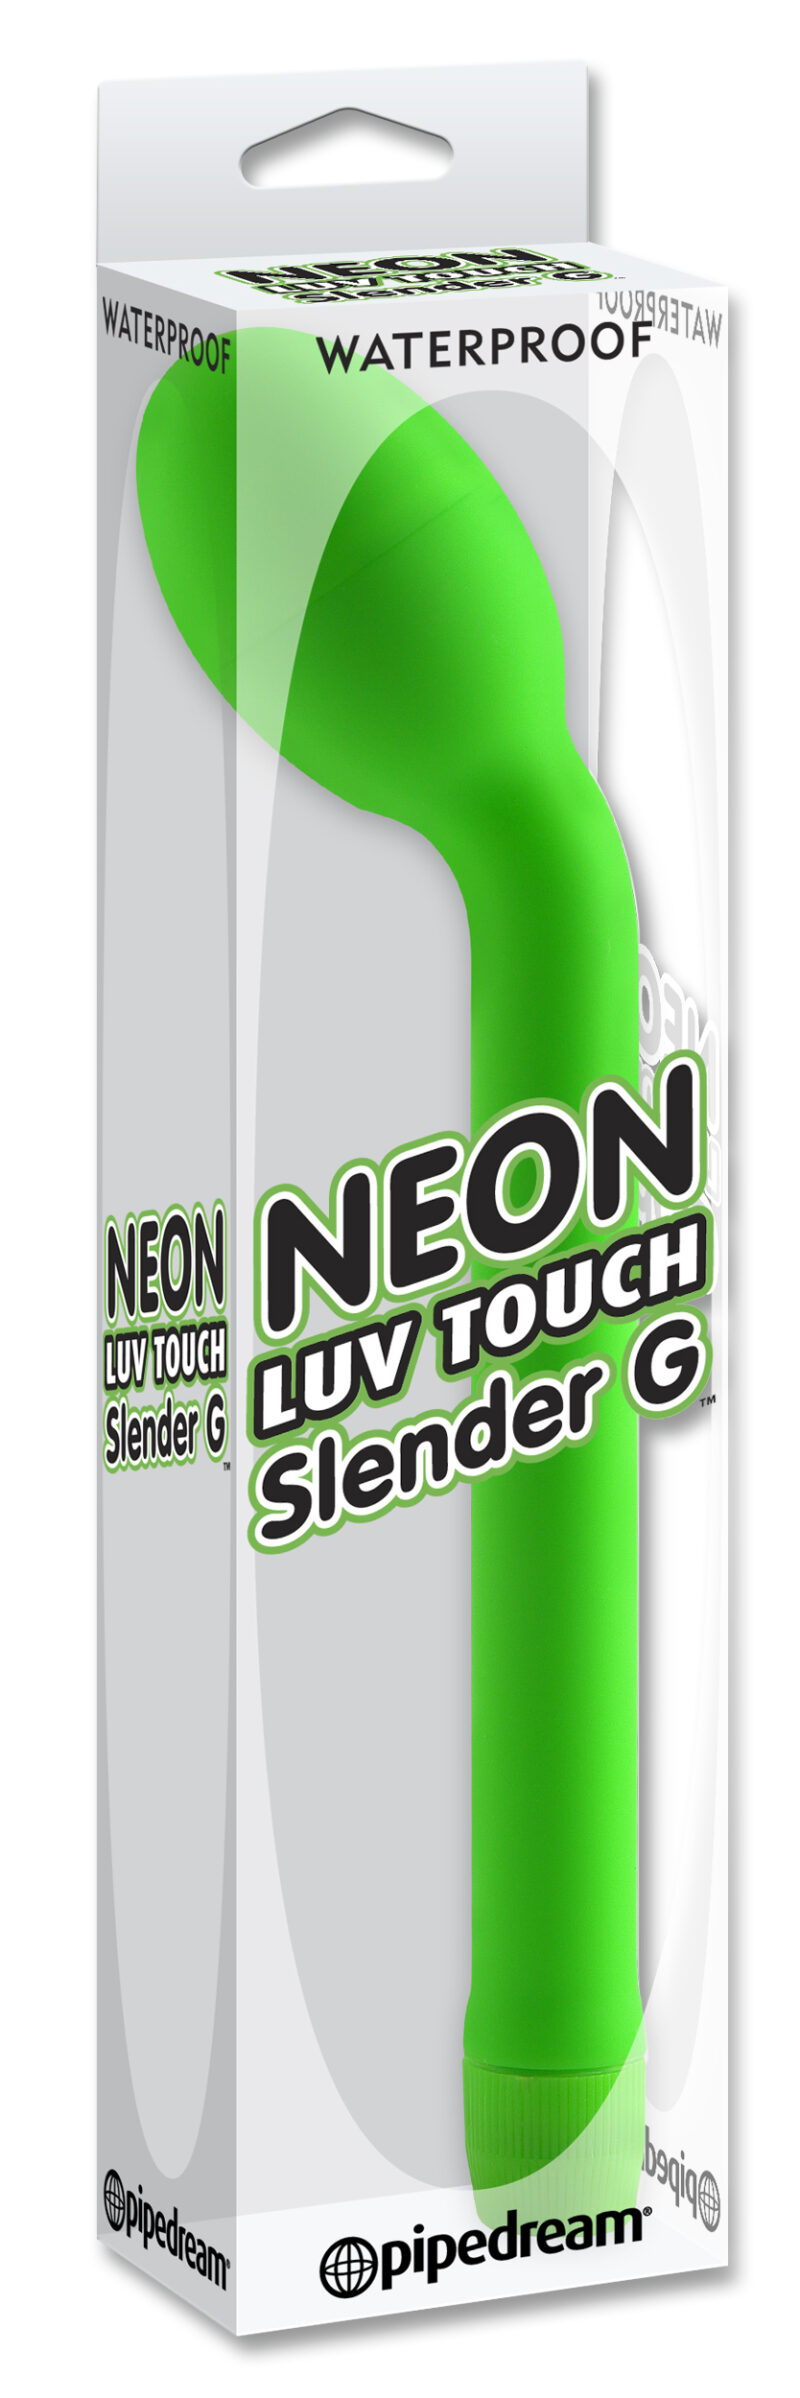 Pipedream Neon Luv Touch Slender G Vibrator Green